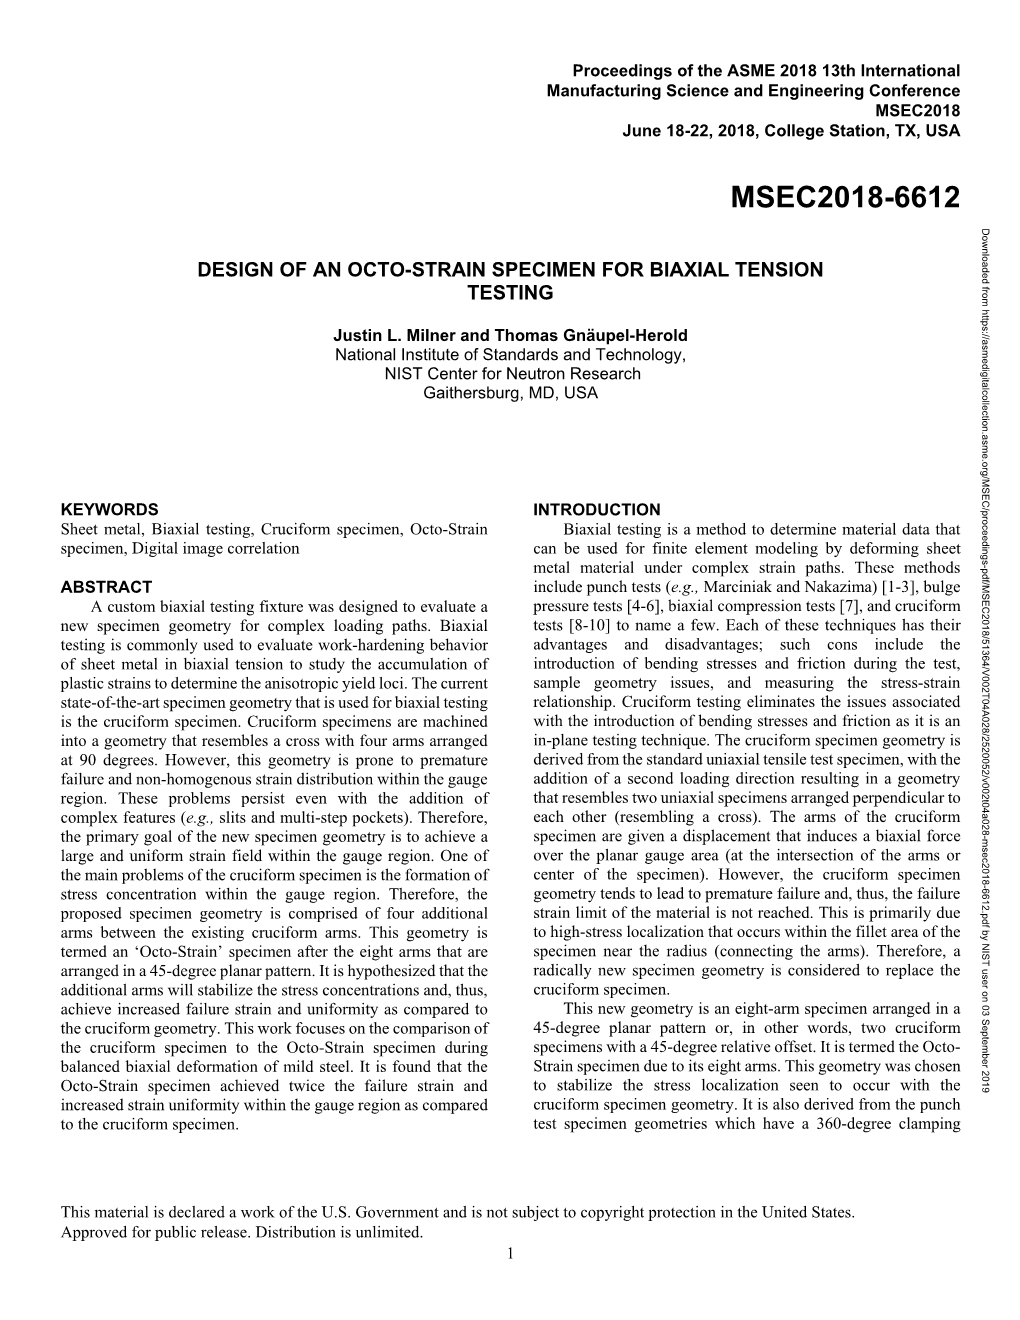 Design of an Octo-Strain Specimen for Biaxial Tension Testing